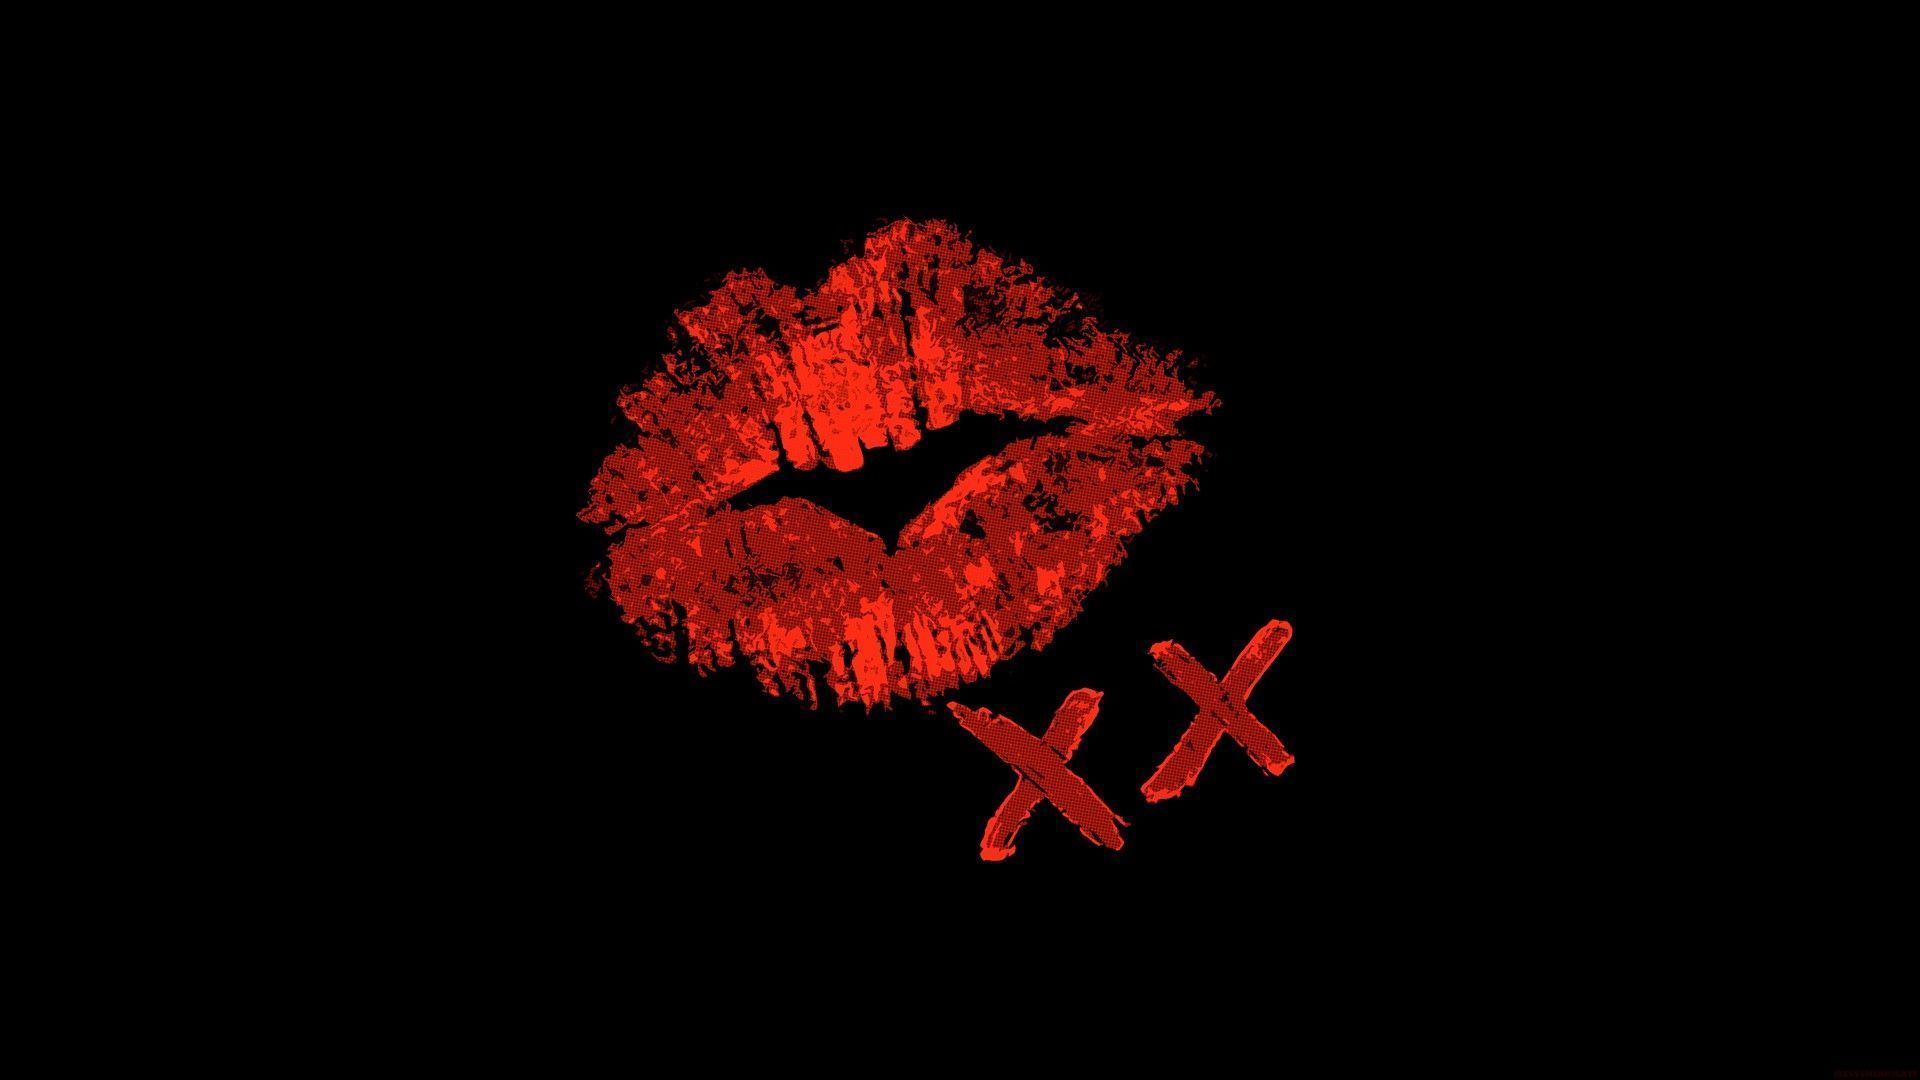 Red Lips Backgrounds